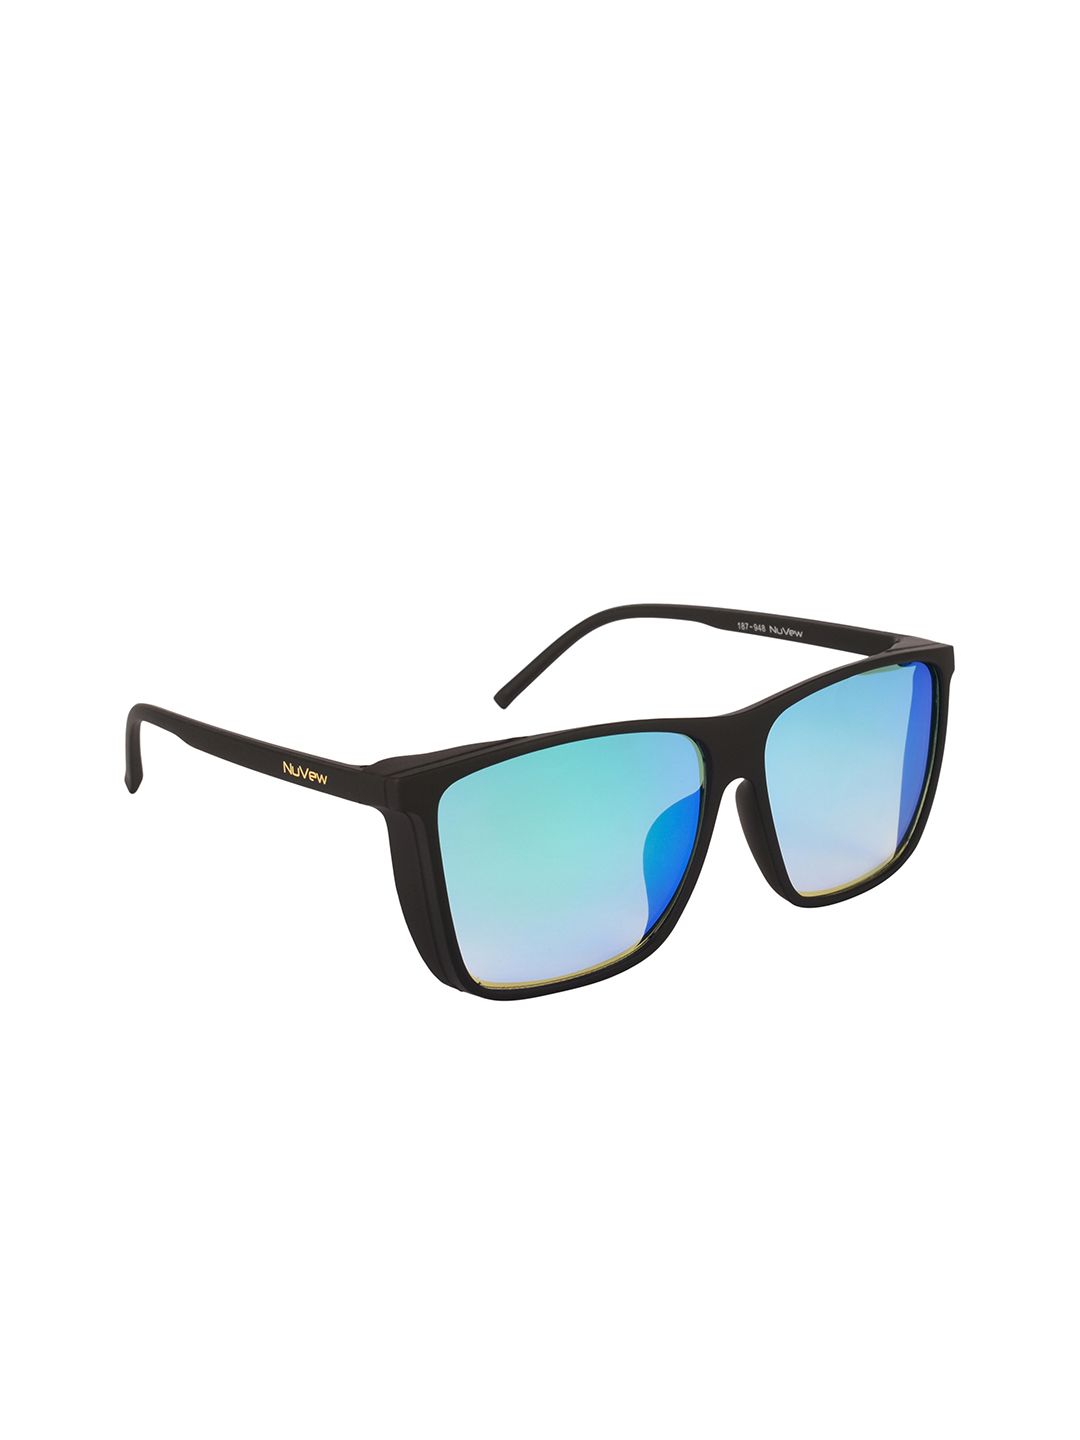 NuVew Unisex Mirrored Lens & Black Wayfarer Sunglasses with UV Protected Lens Price in India